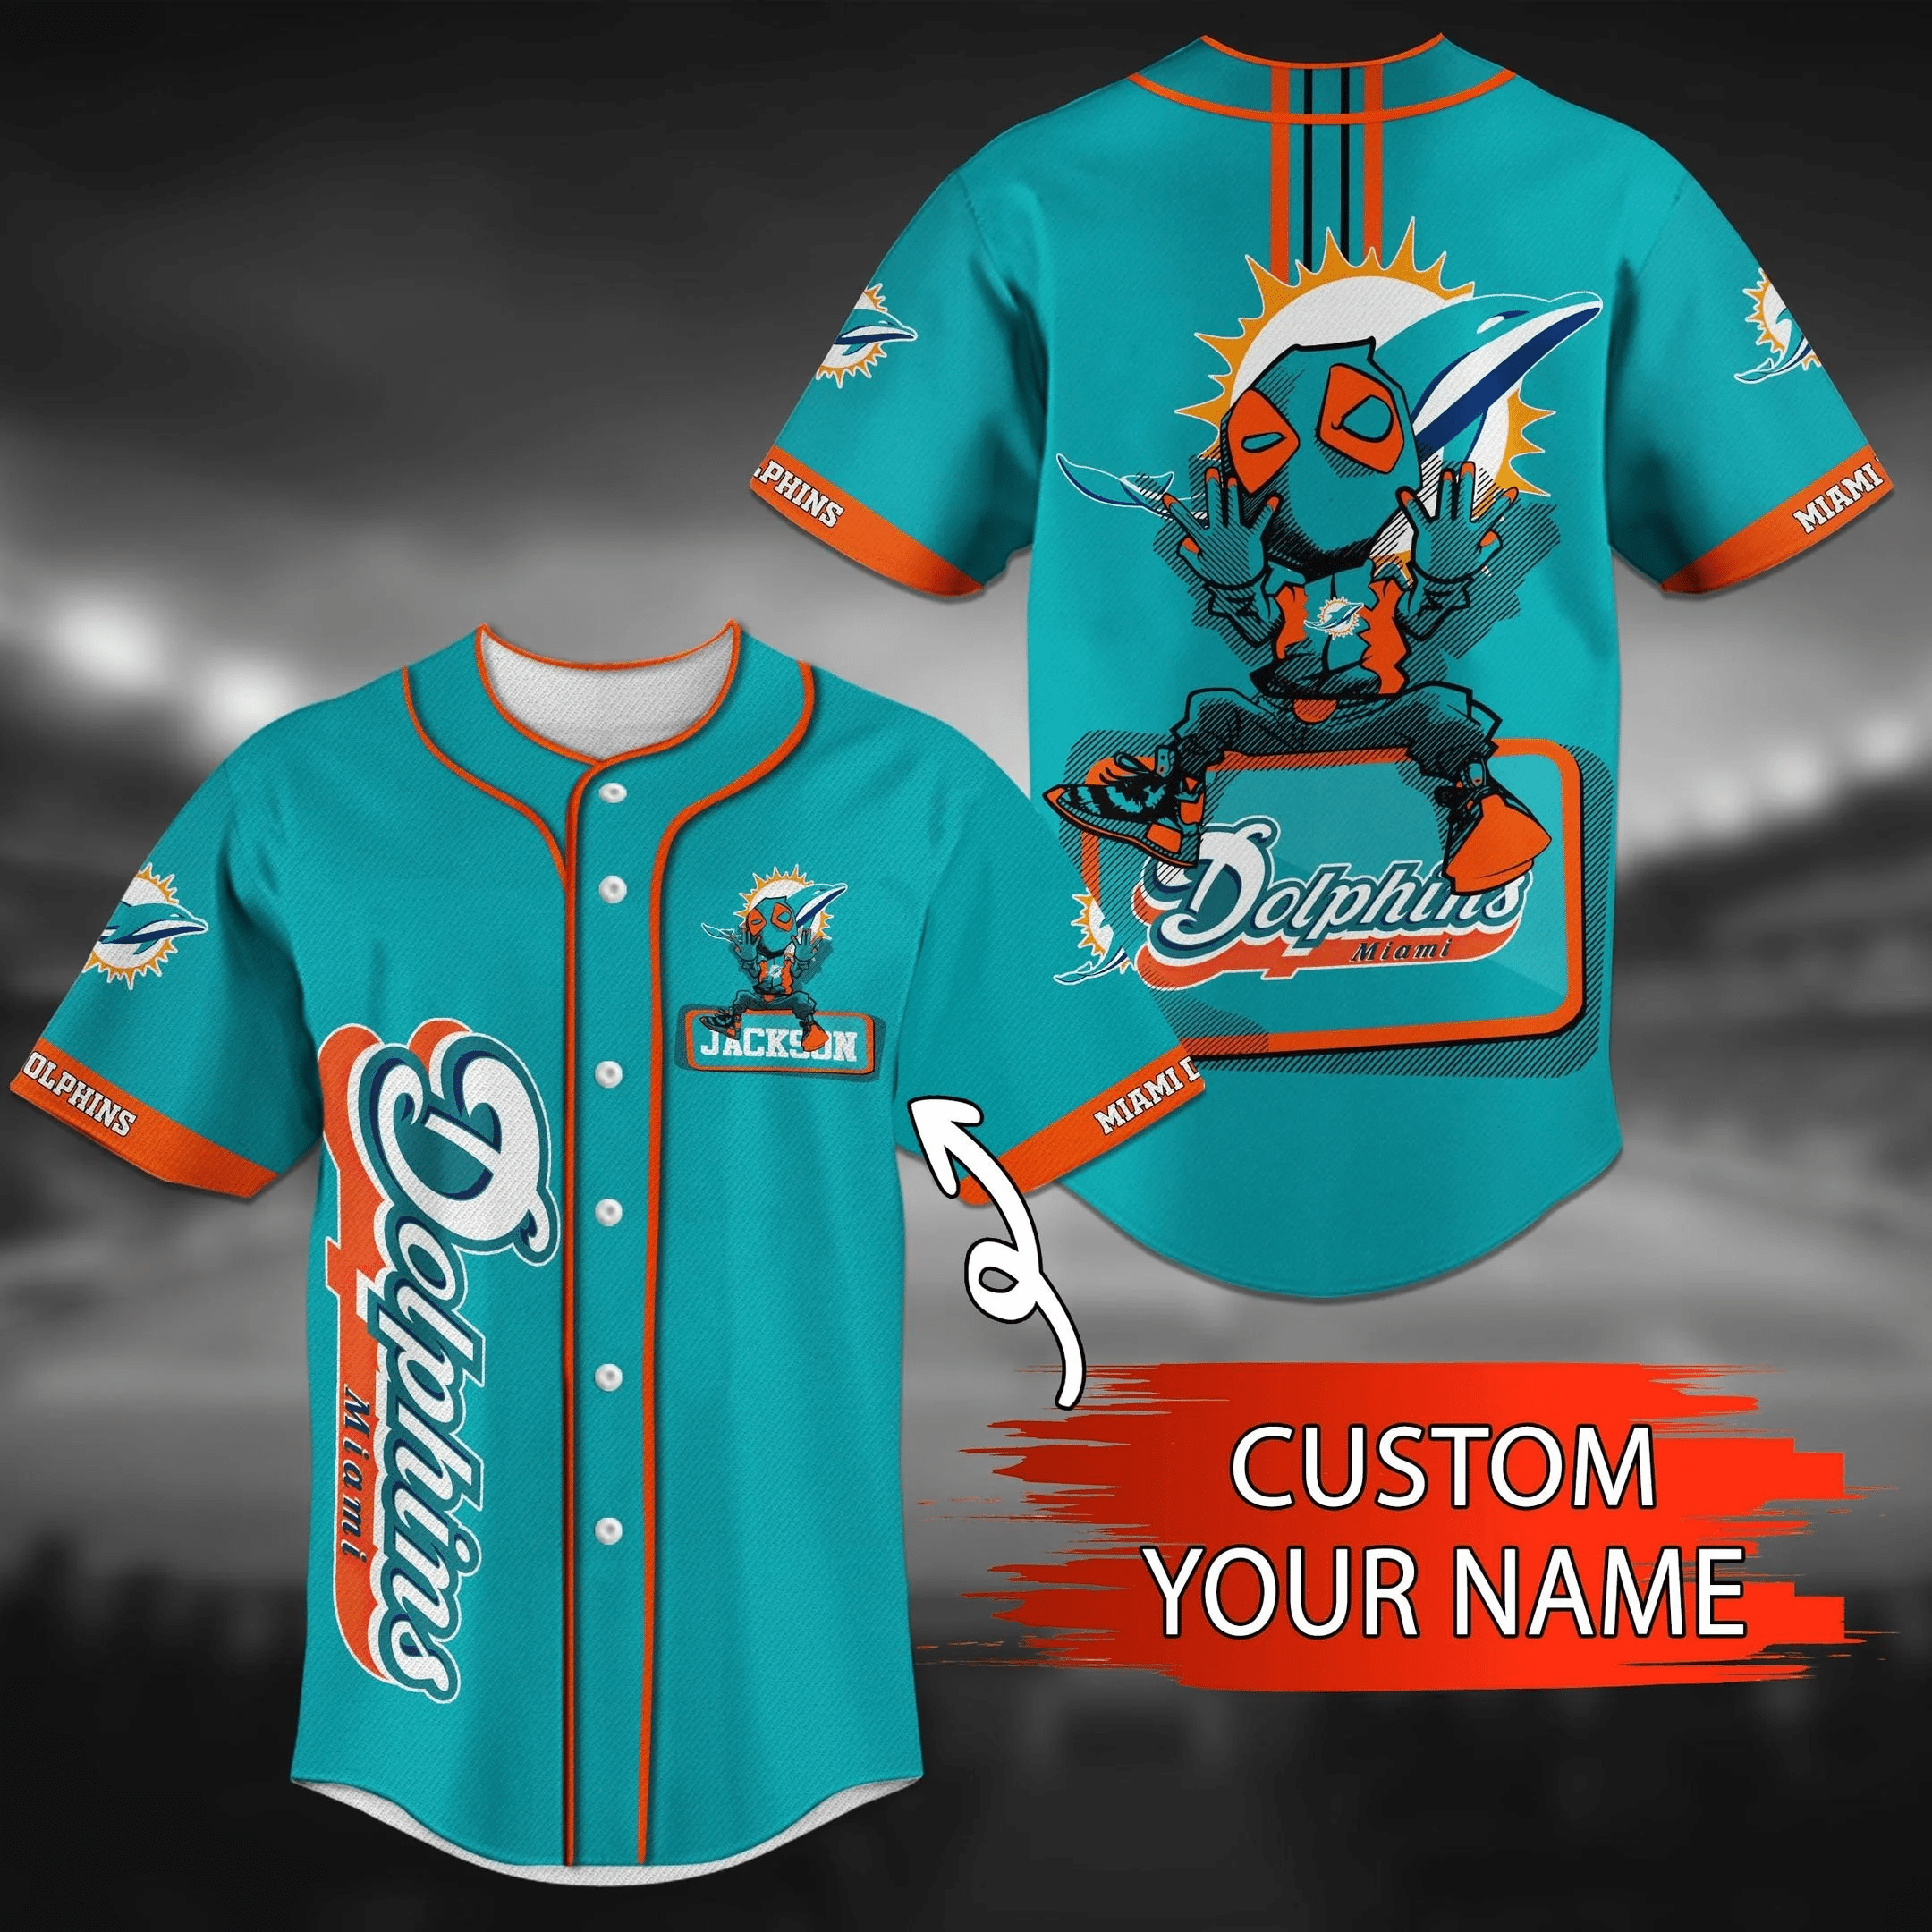  Miami Dolphins NFL Personalized Custom Name Baseball Jersey Shirt